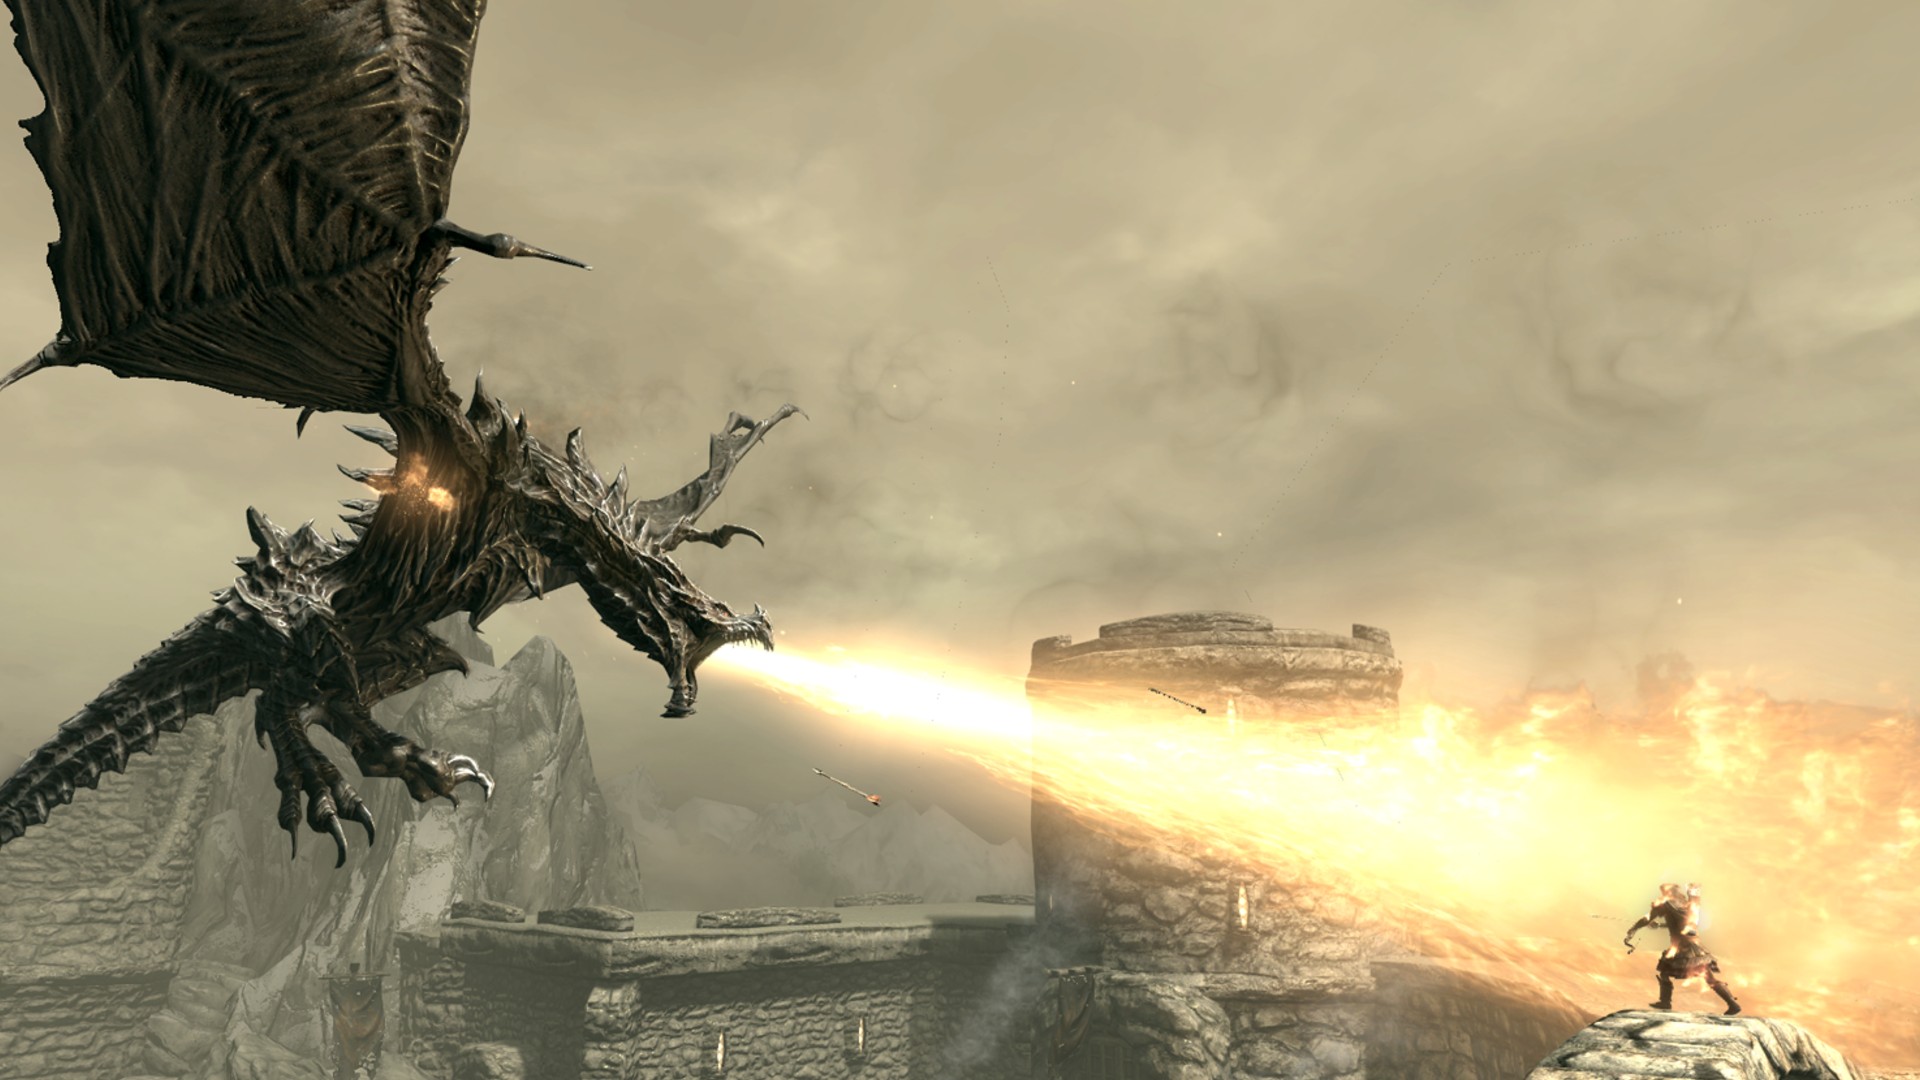 Best dragon games: Skyrim. Image shows a dragon breathing fire on somebody.